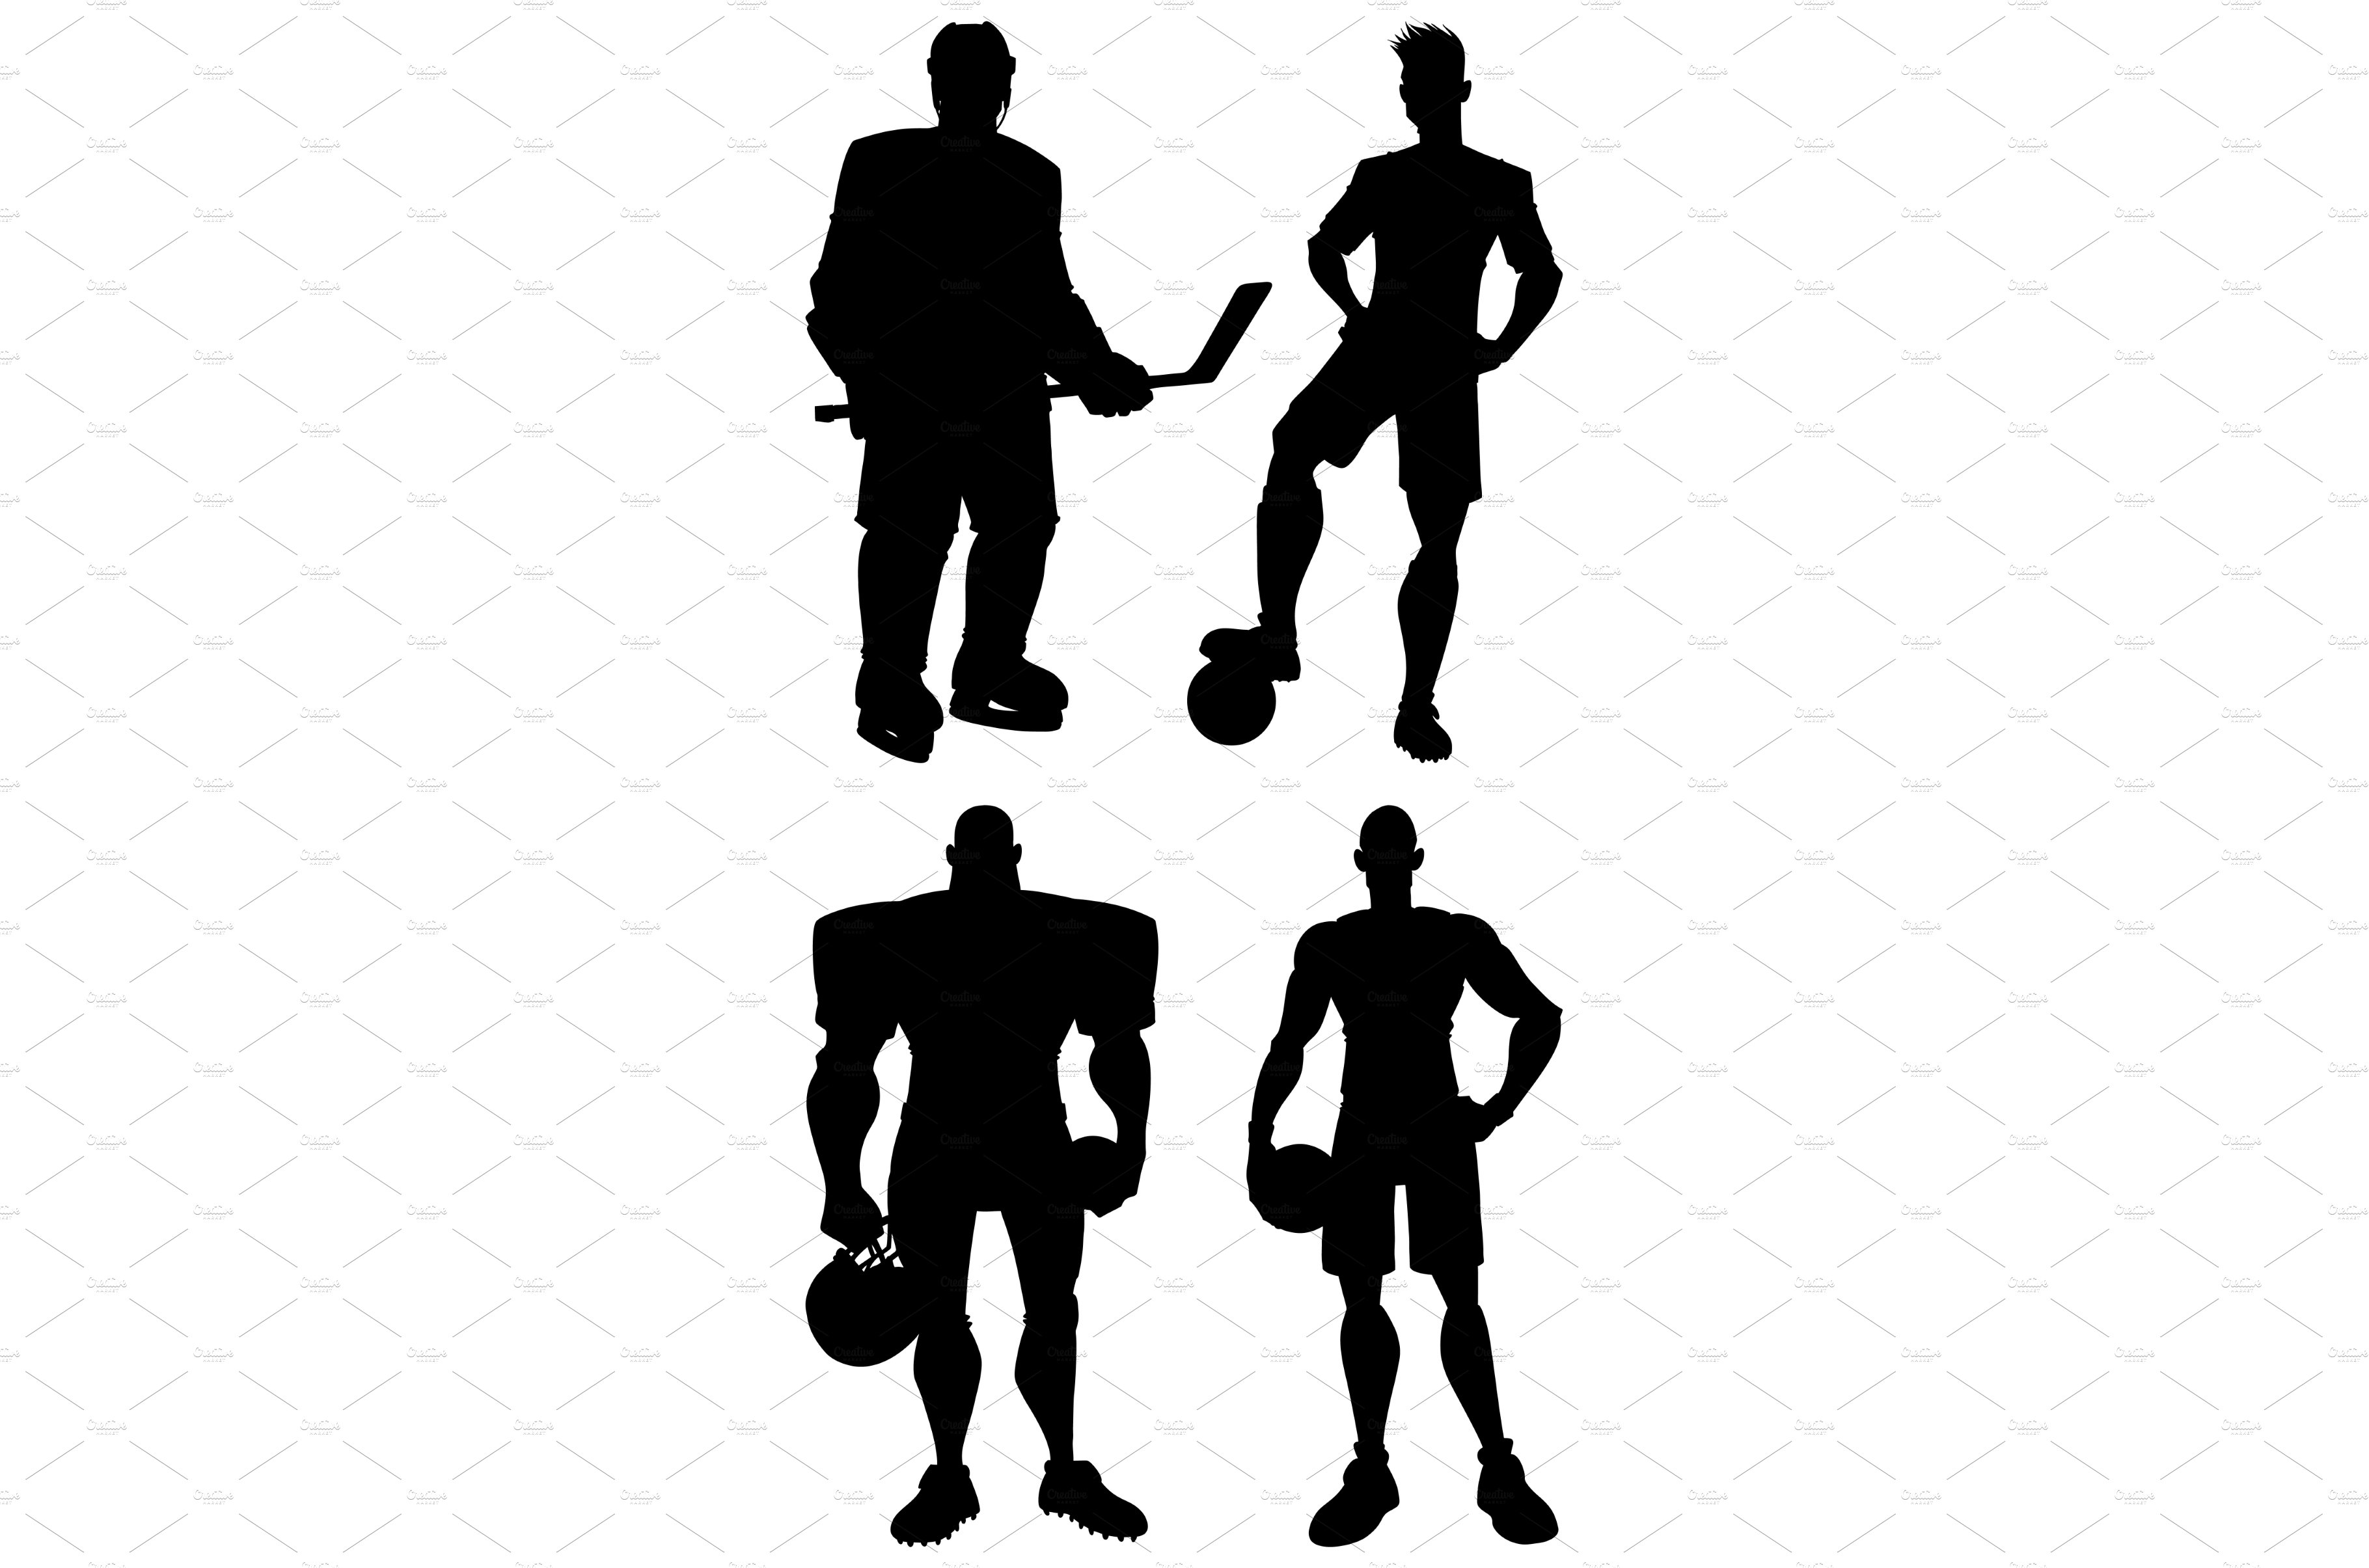 Athletes Silhouettes Set cover image.